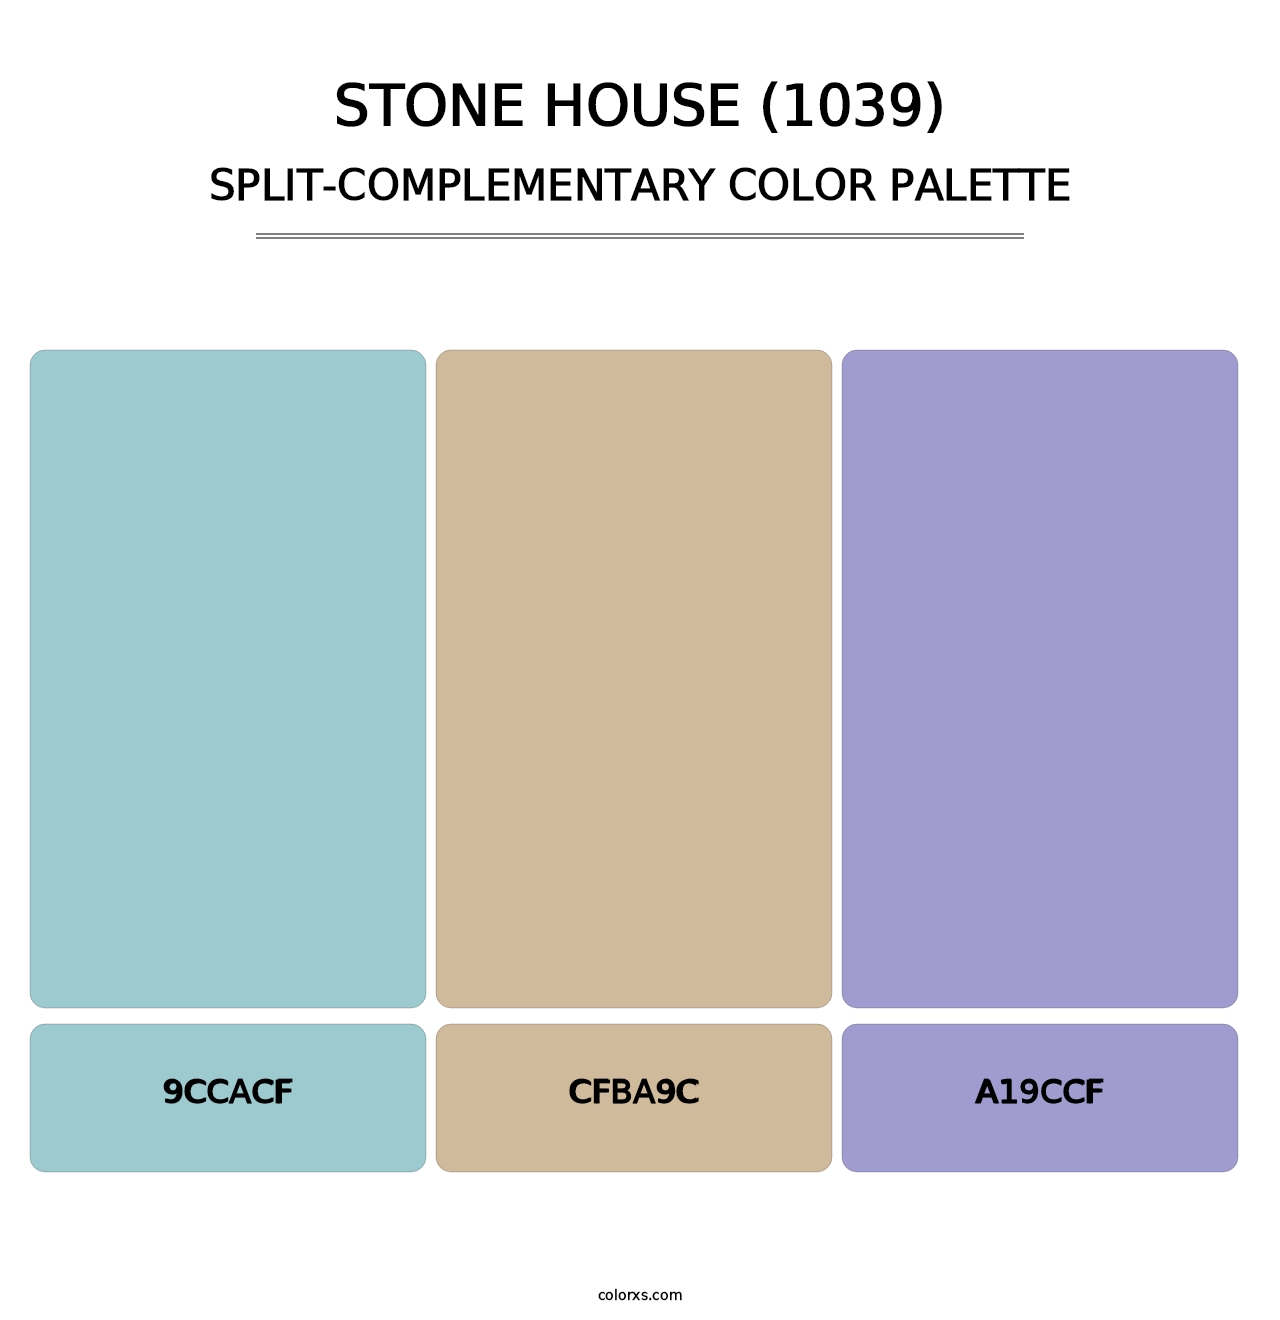 Stone House (1039) - Split-Complementary Color Palette